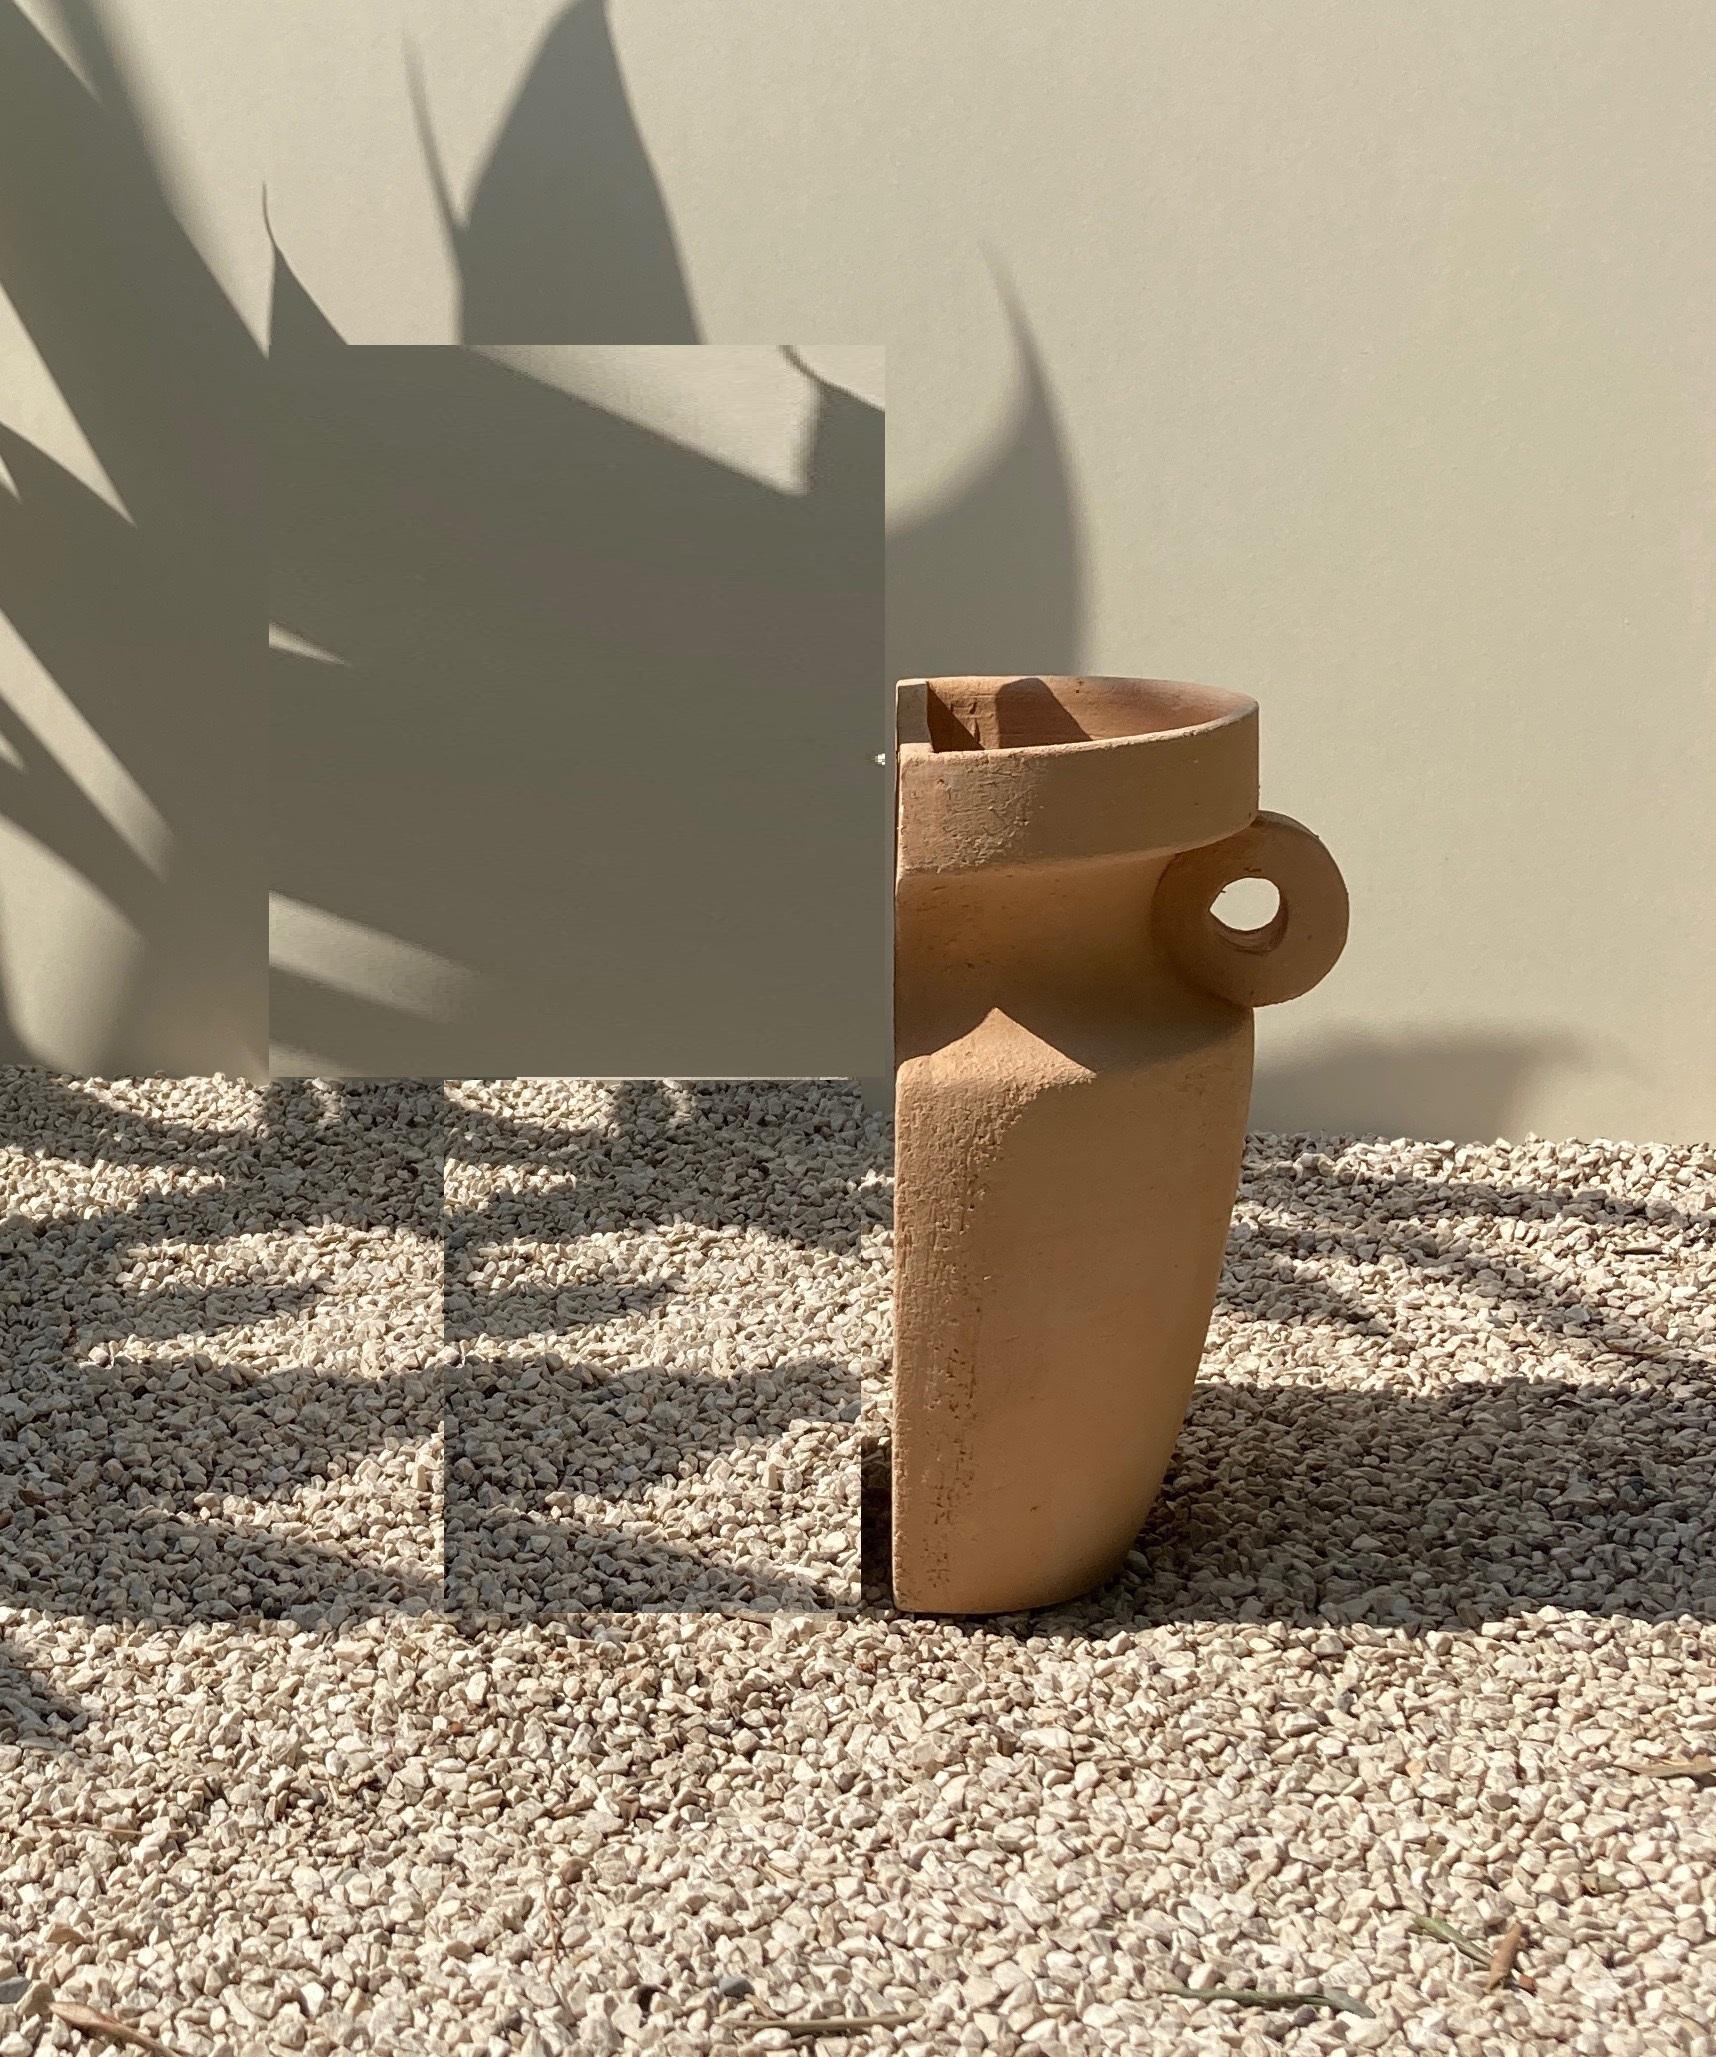 Terracotta Les Inseparables flower vase by Lea Ginac
Limited Edition of 2.
Dimensions: D 15 x W 20 x H 26 cm 
Materials: Chamotte earth in white or terracotta
Technique: Hand-modeling.
Available in two colors, terra cotta, and white. Price per